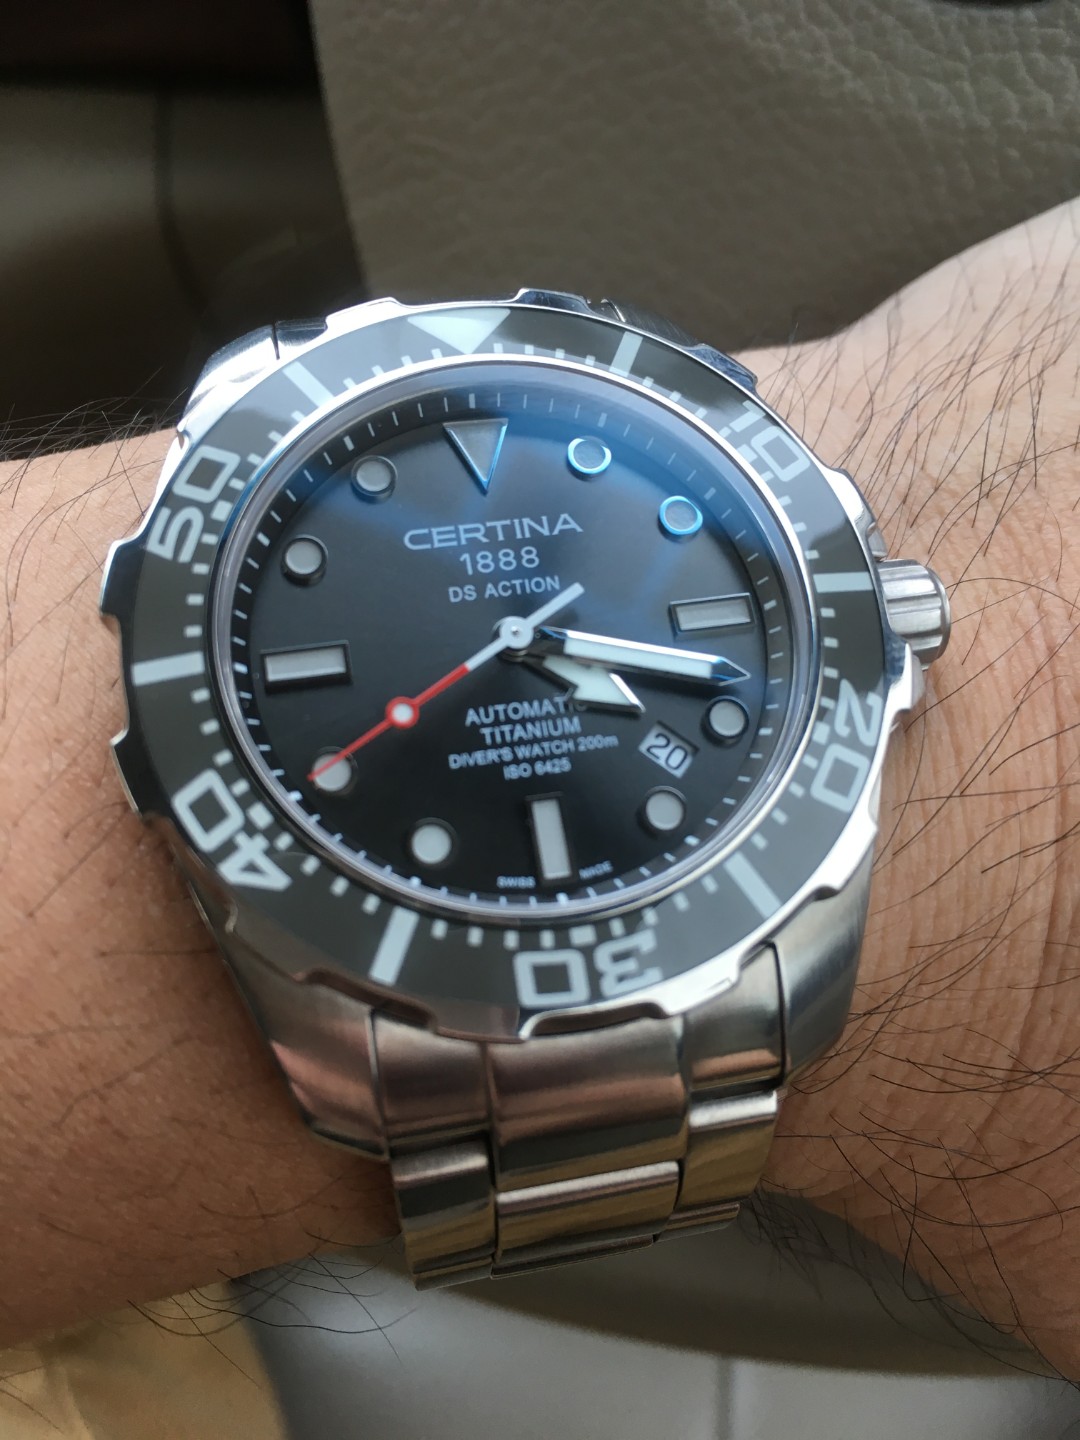 Hands-on With The Certina DS Action Diver Titanium | vlr.eng.br